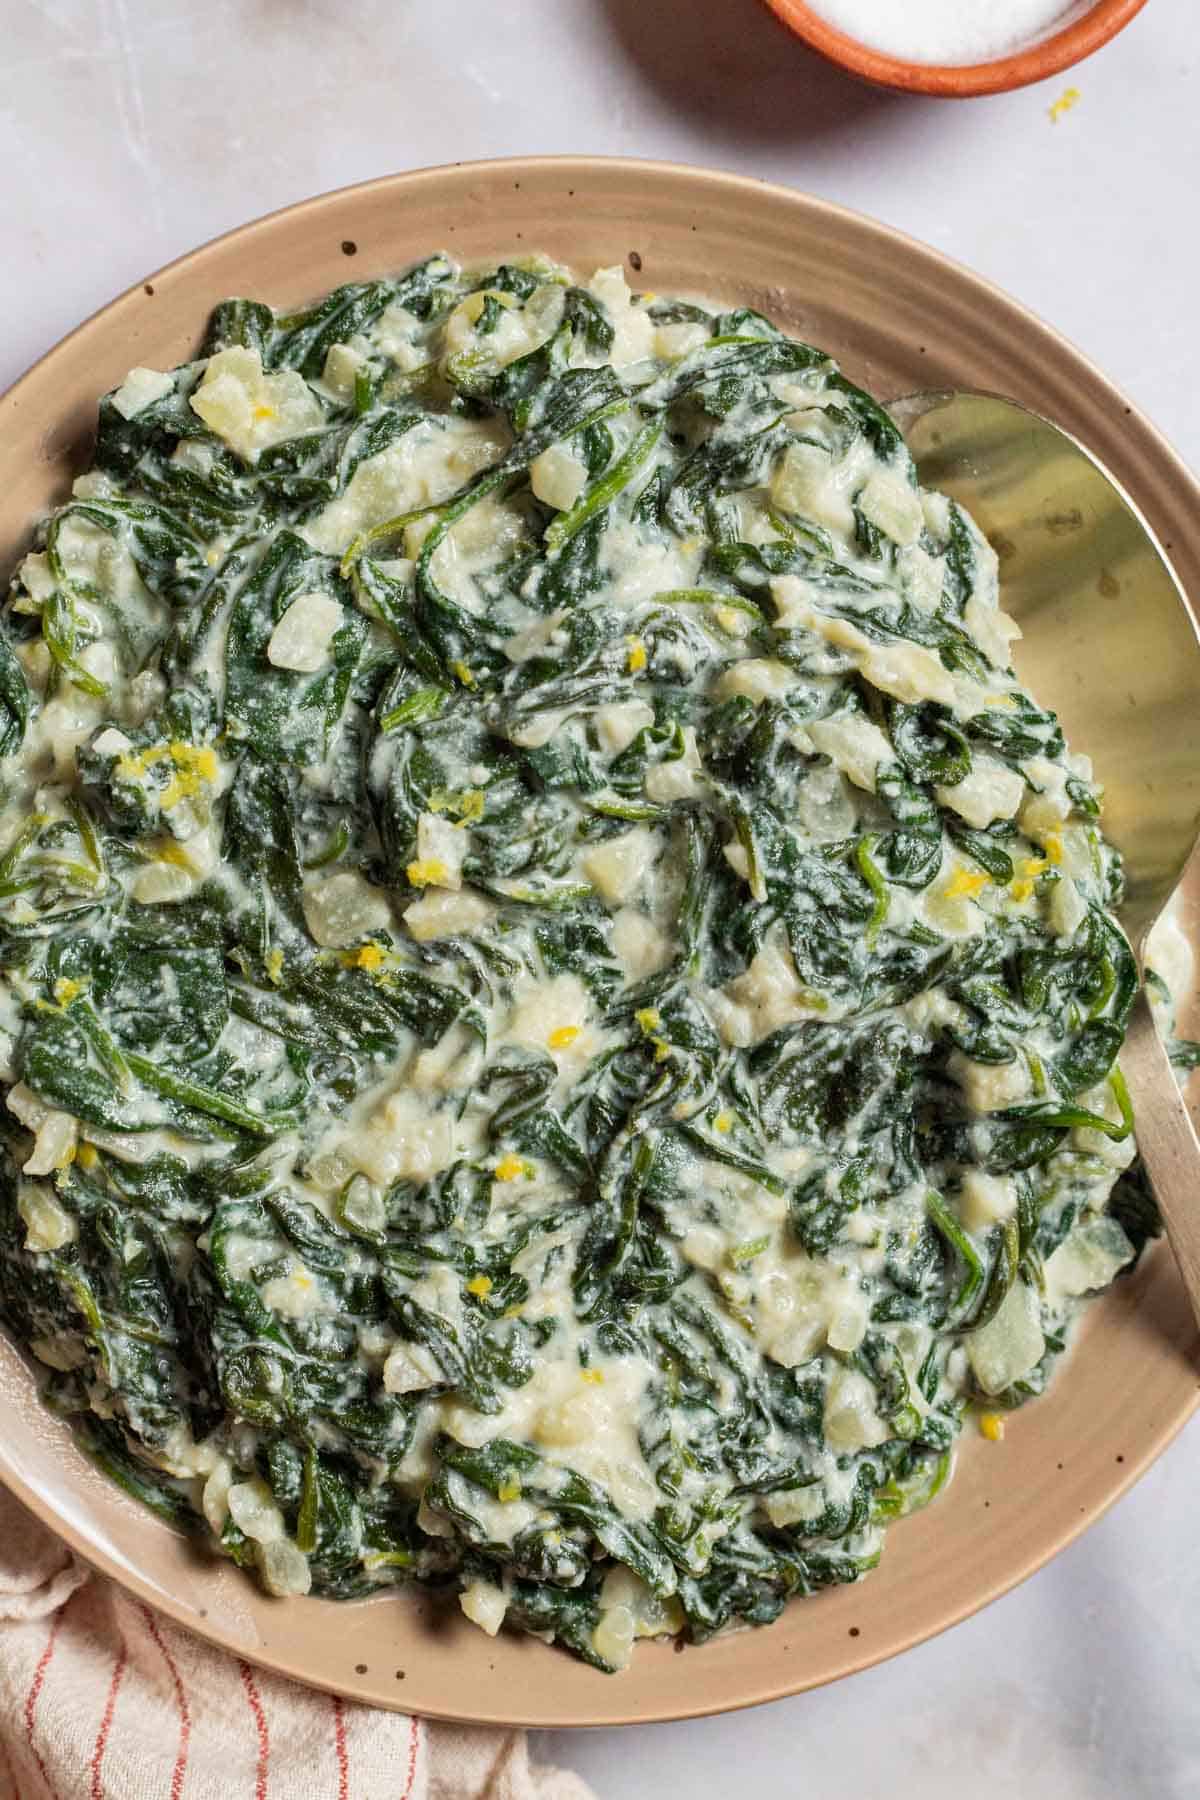 An overhead photo of creamed spinach on a plate with a spoon. Next to this is a small bowl of salt and a towel.